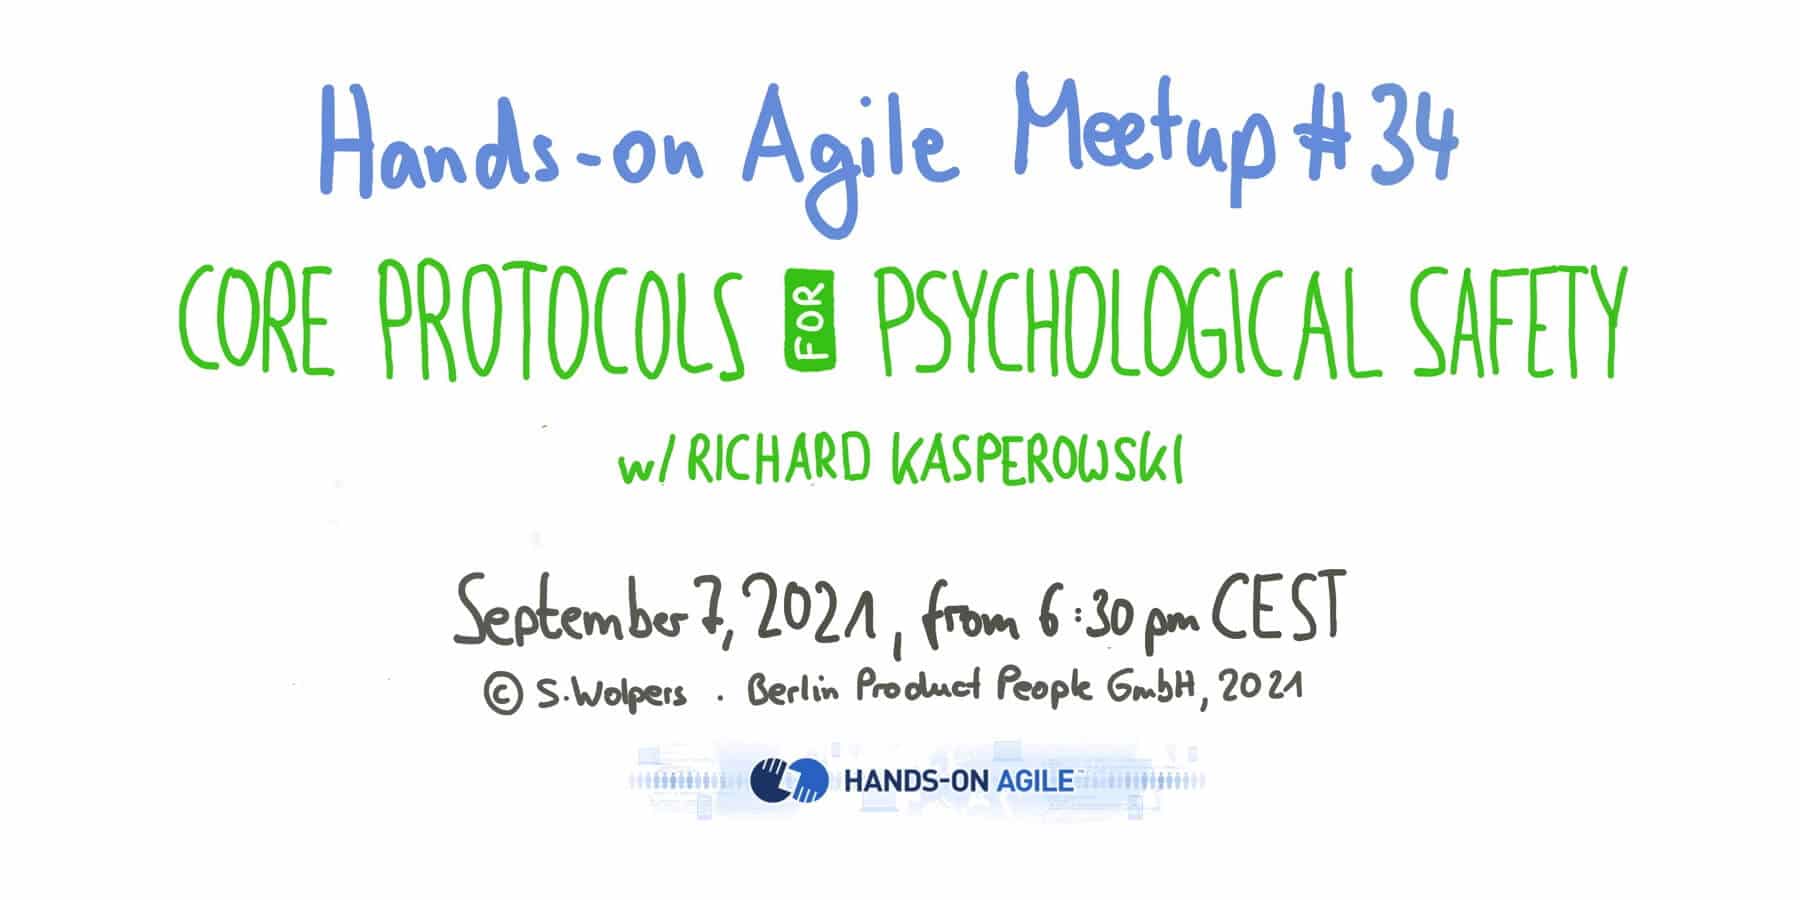 Hands-on Agile #34: Core Protocols for Psychological Safety — Richard Kasperowski — Berlin Product People GmbH